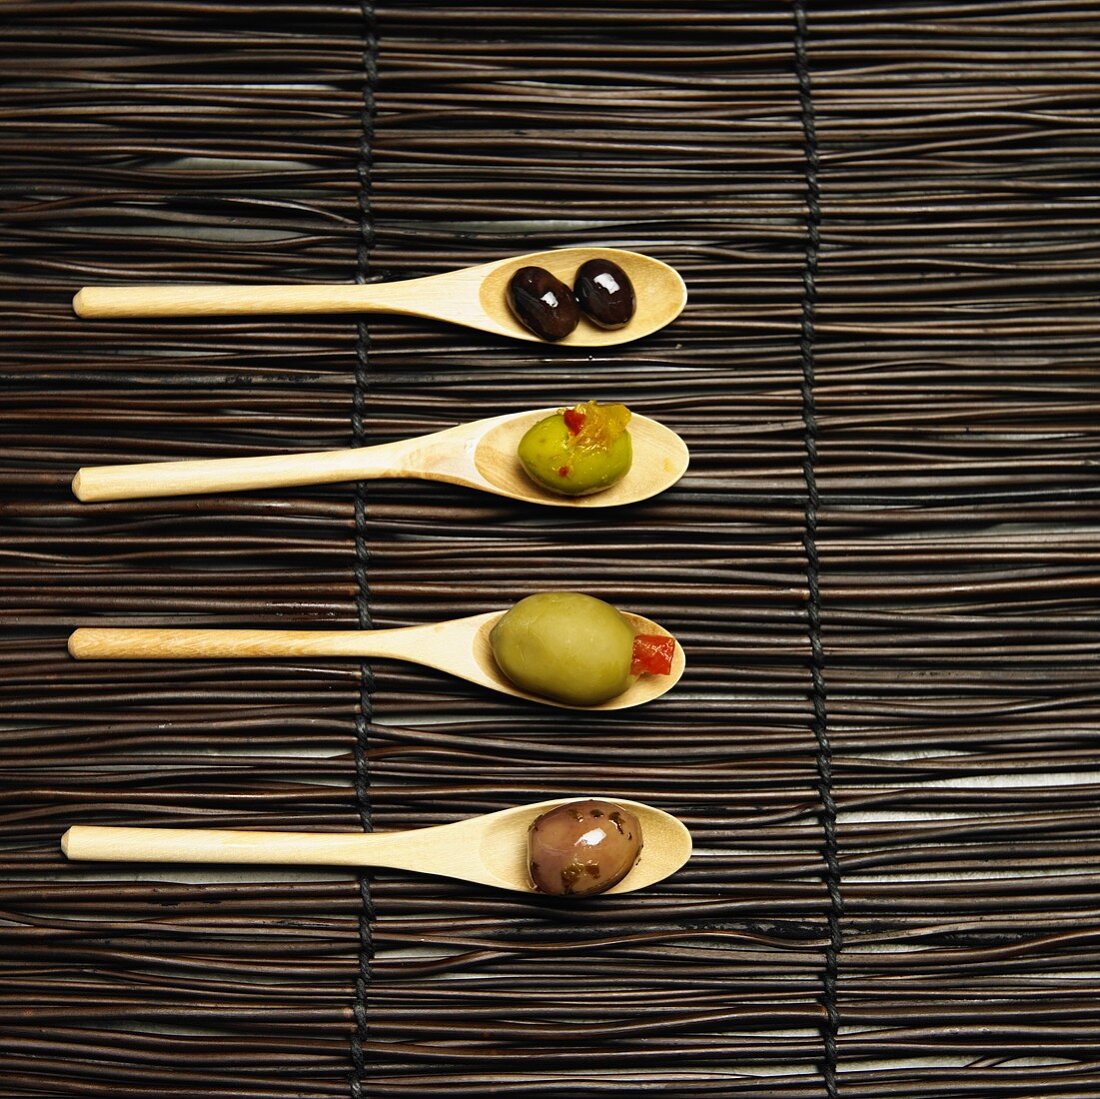 Various Olives on Four Small Wooden Spoons